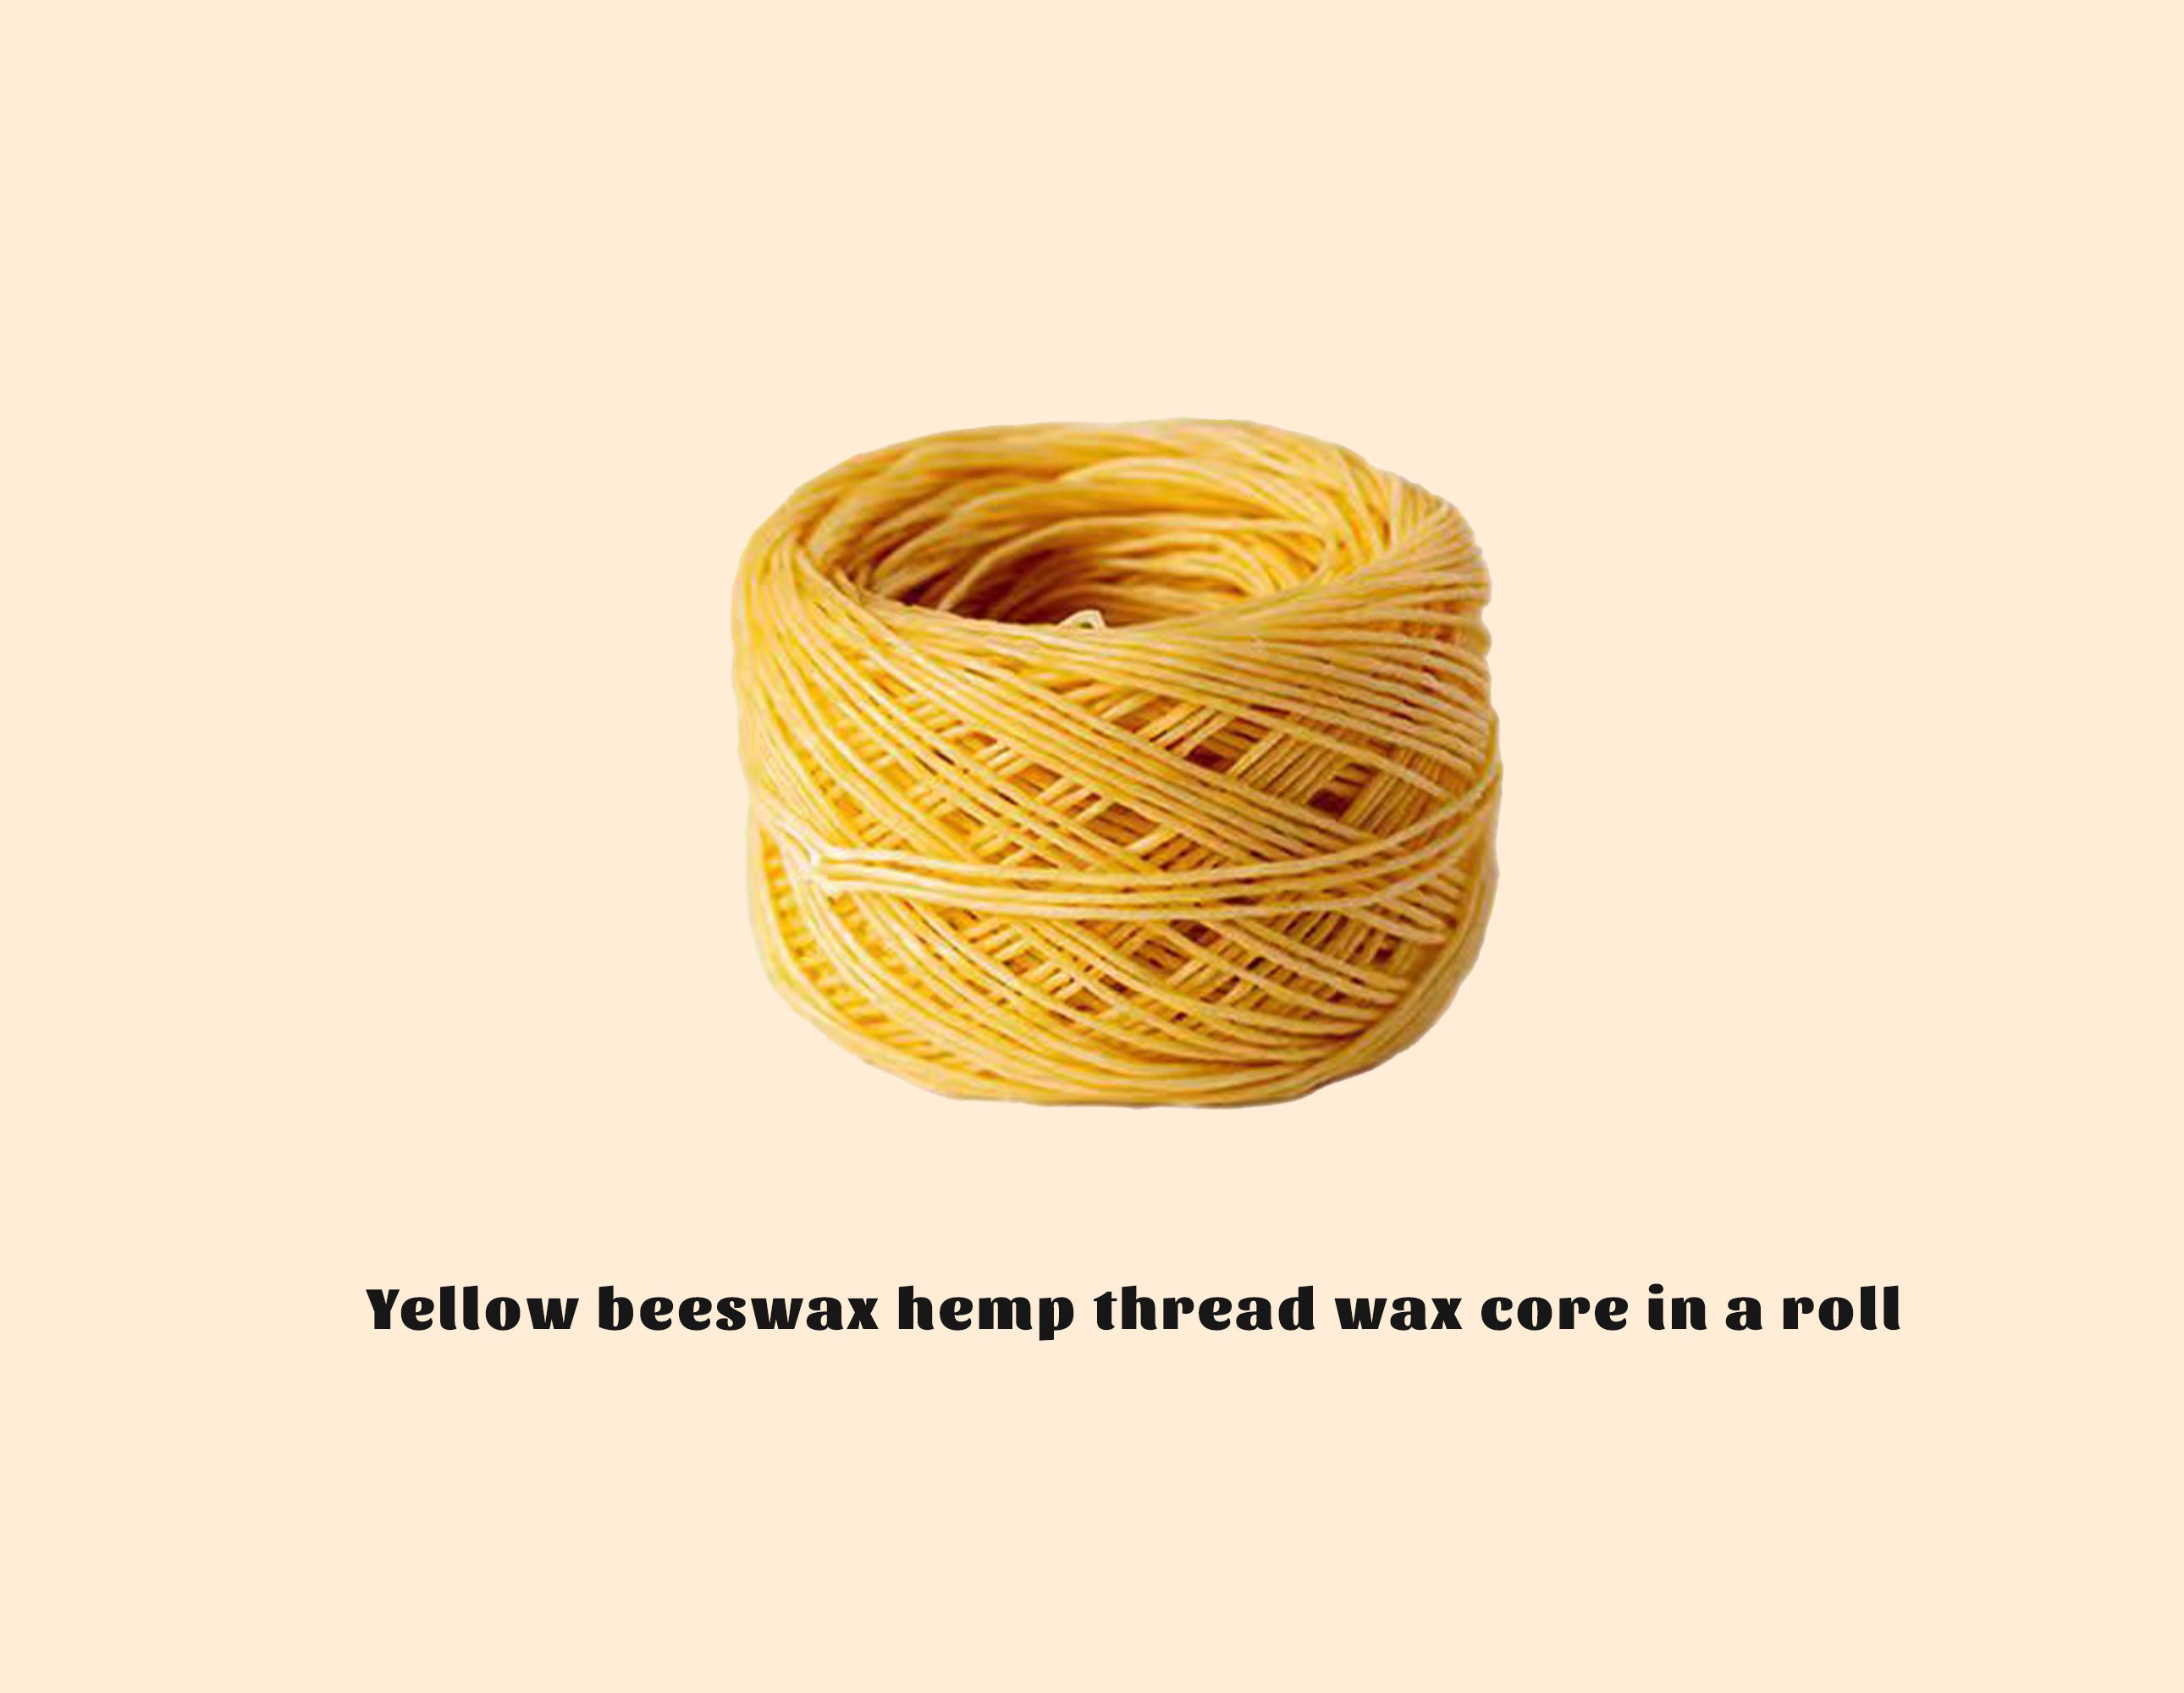 MILIVIXAY 8 Inch Hemp Wick,100 Piece Hemp Candle Wicks, Pre-Waxed by 100%  Natural Beeswax & Tabbed, Beeswax Wicks for Candle Making.